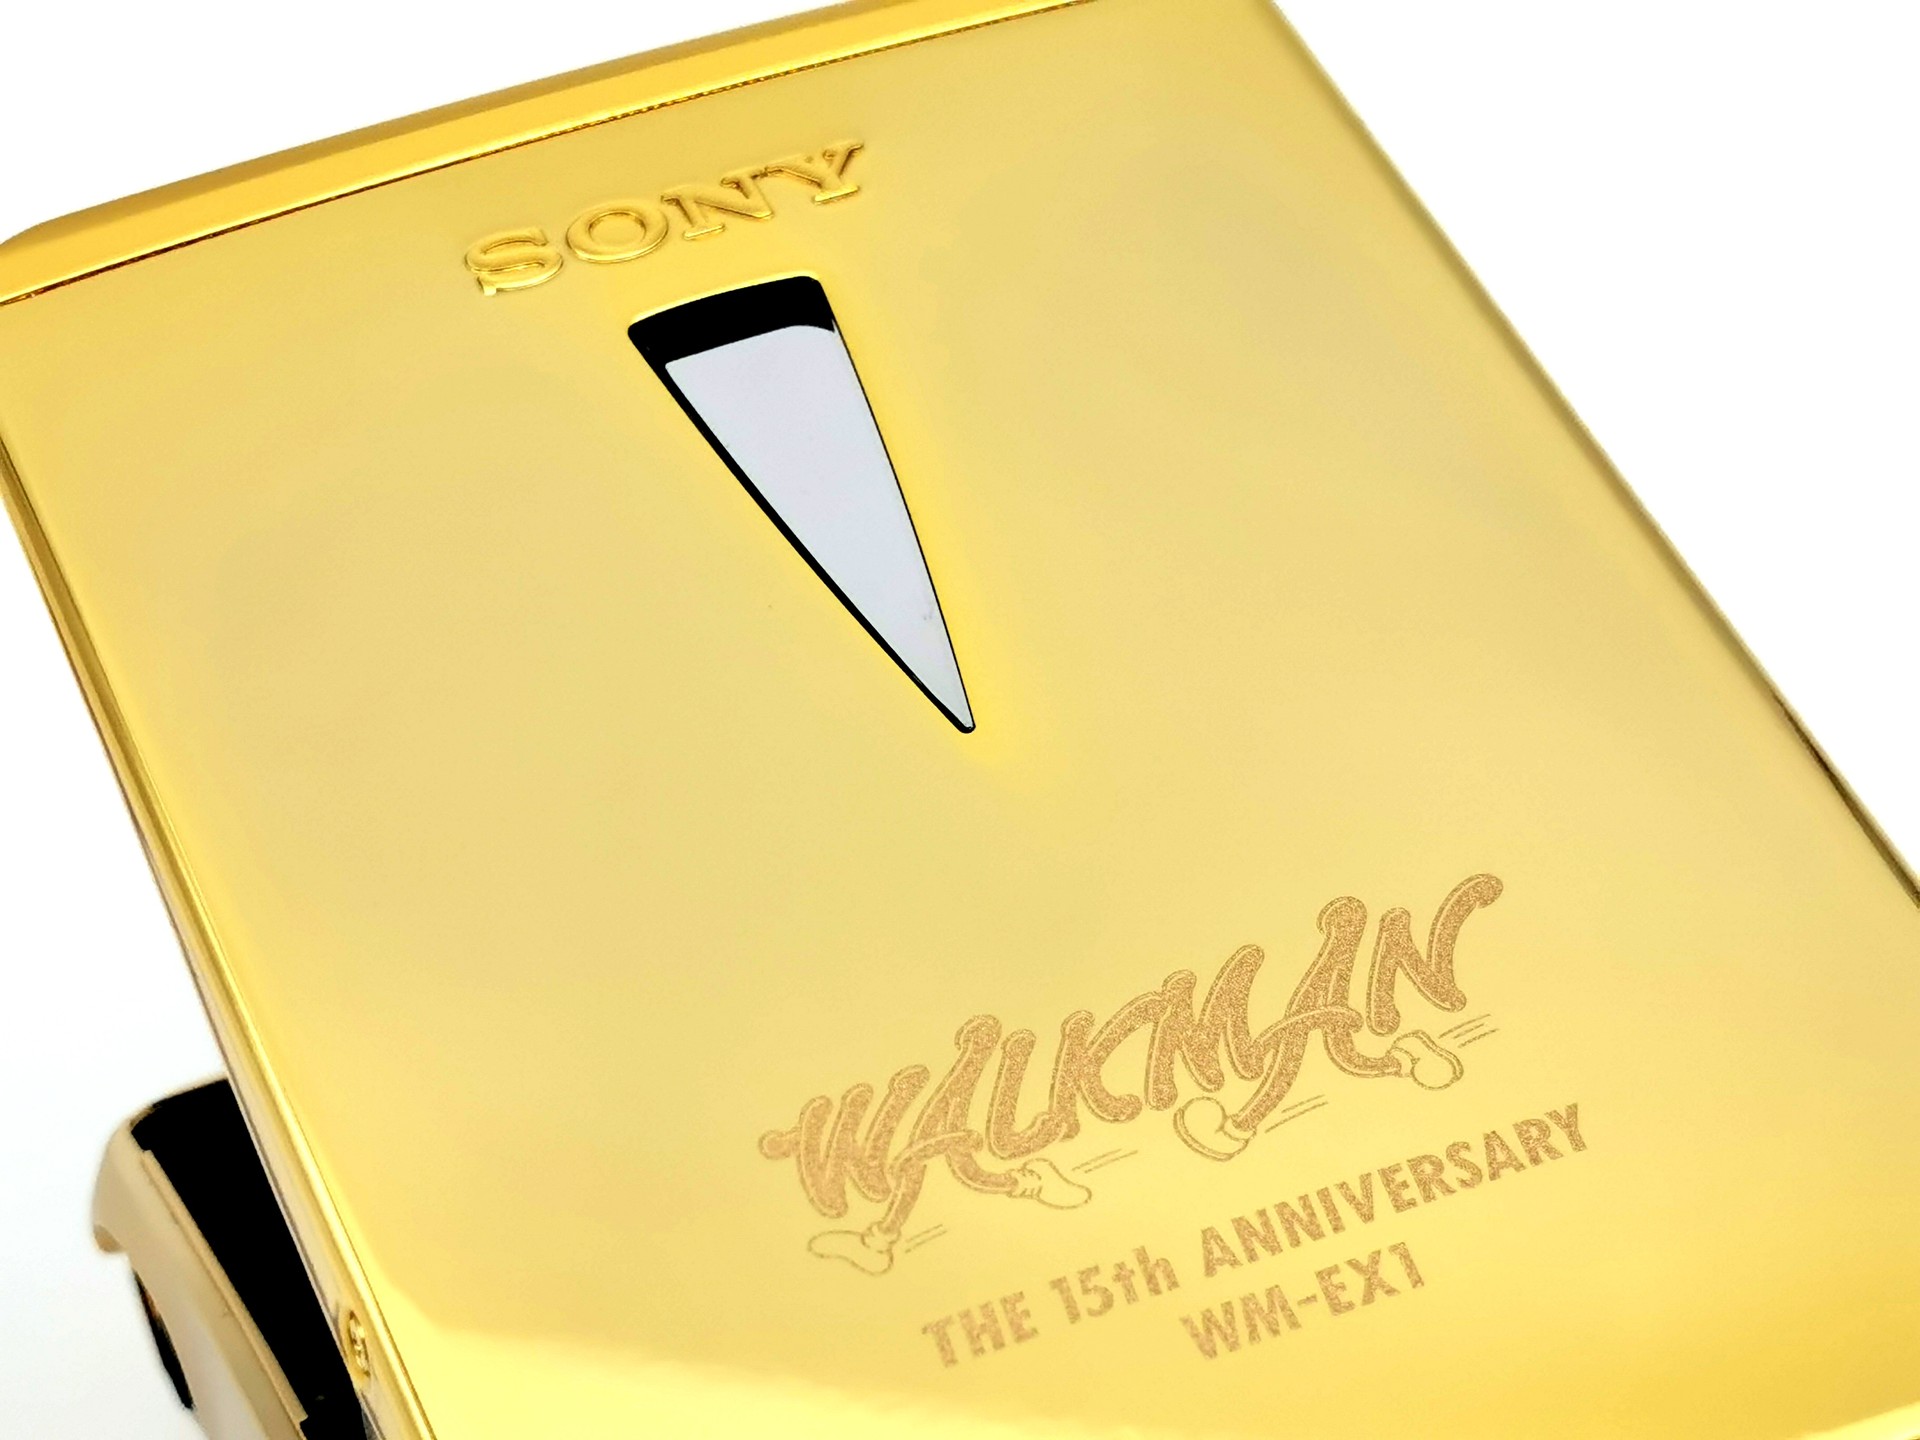 Sony_WM-EX1HG_-_Gold_angled_door_open_with_commemorative_text_g-boxedwalkman